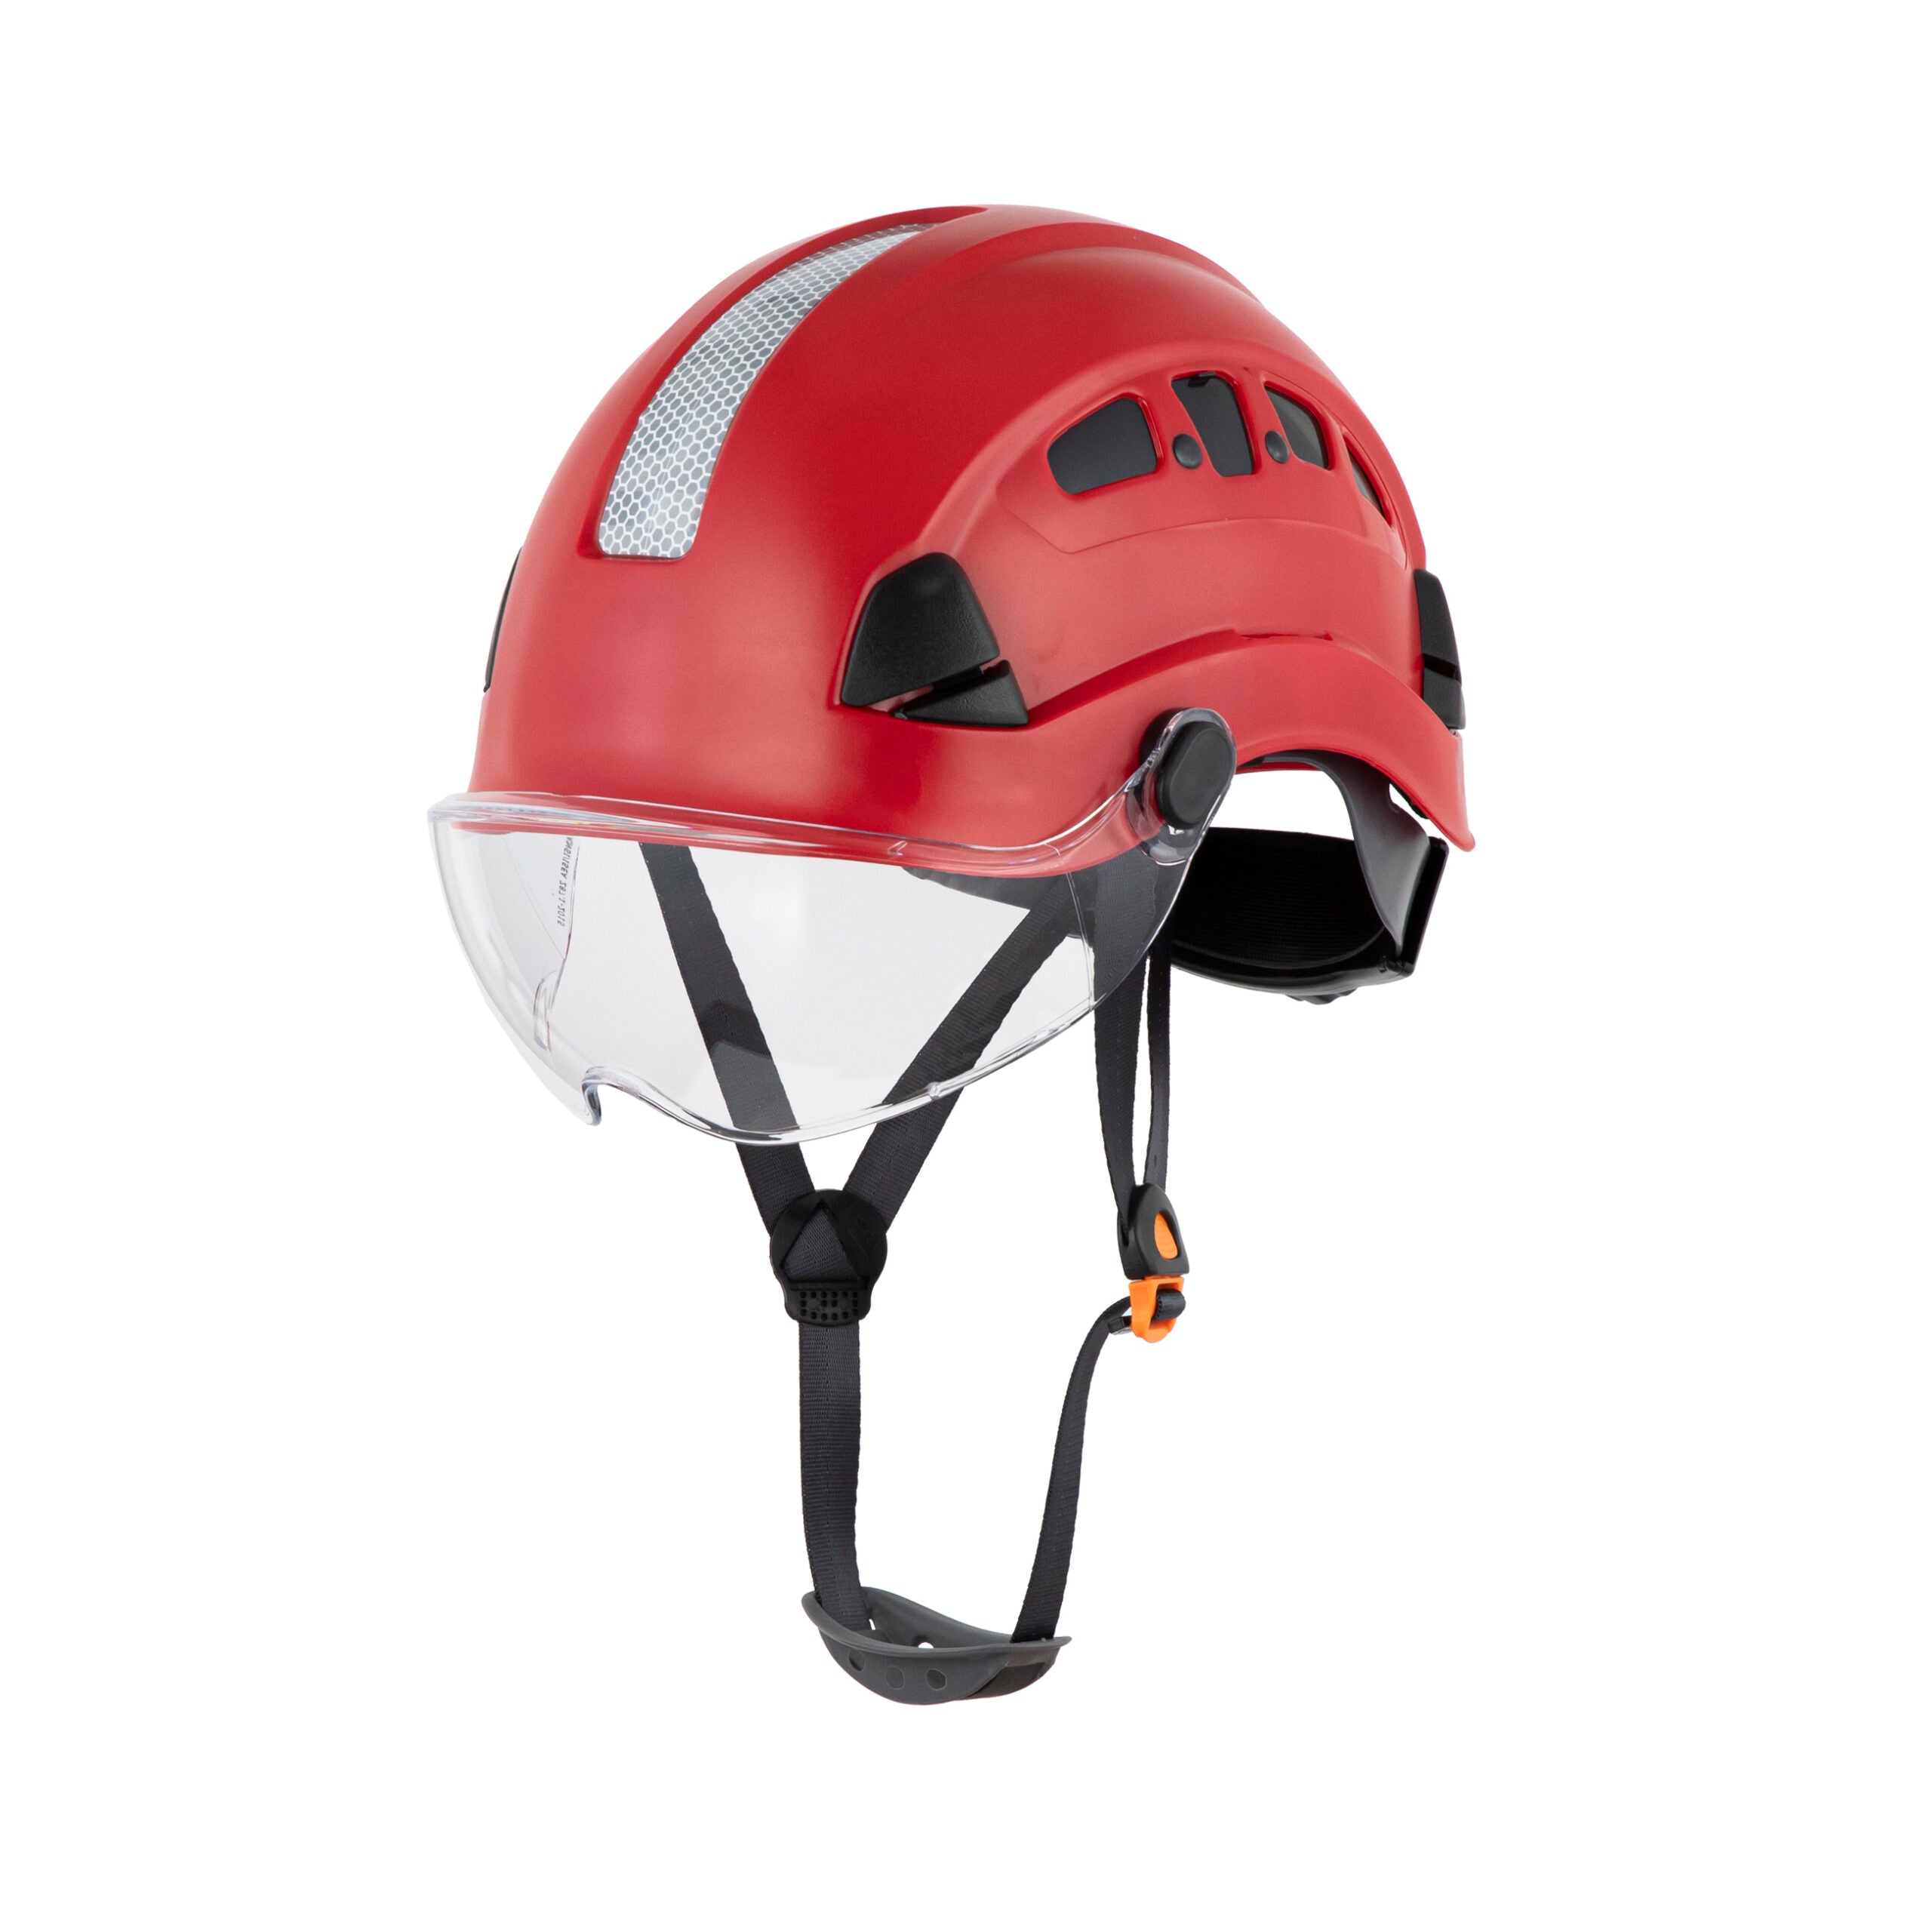 H1-CH Safety Helmet With Visor, Type 1 Class C, ANSI Z89.1 - Defender Safety